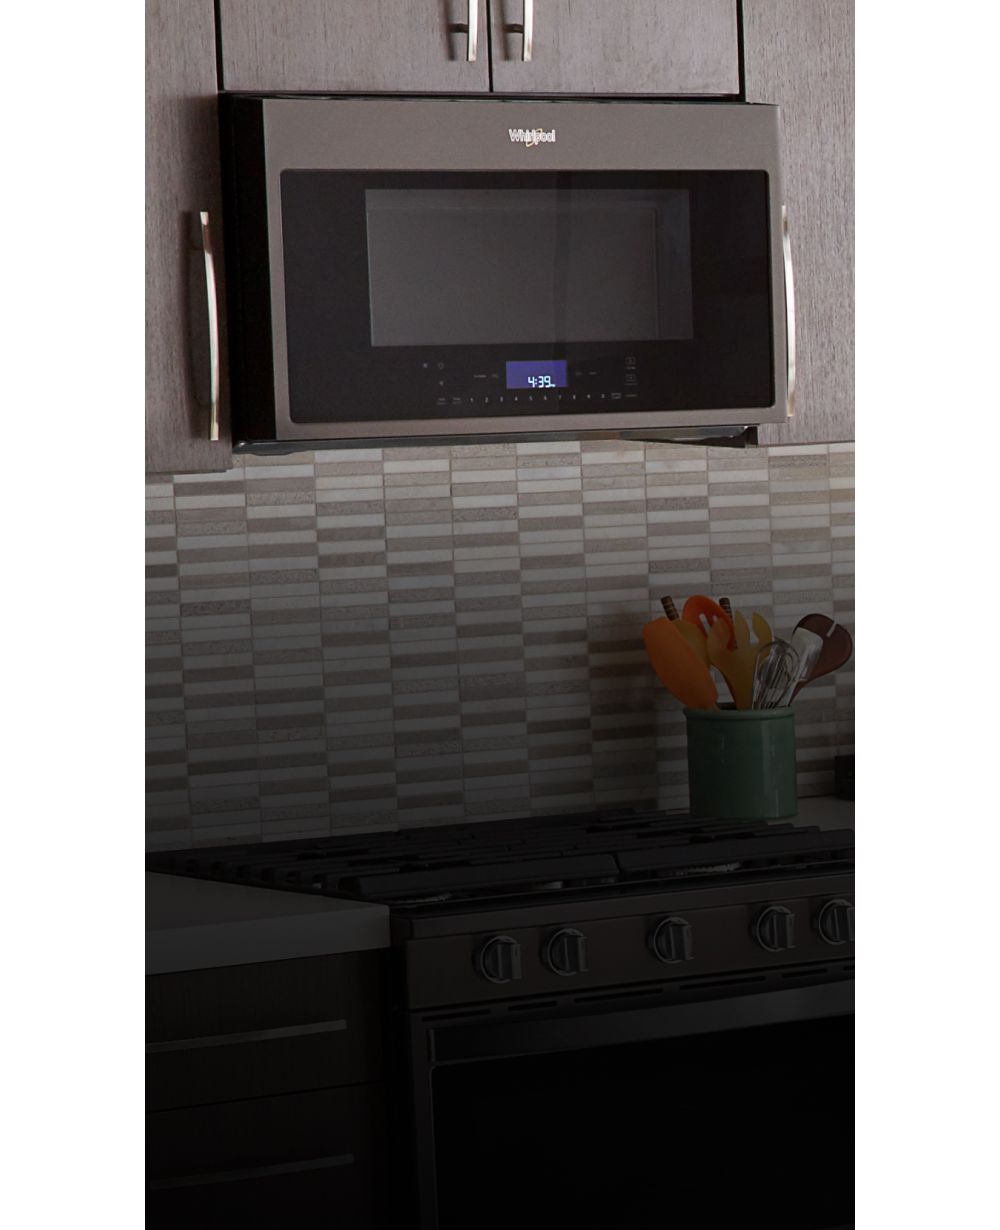 Whirlpool Gt4185sks 1 8 Cu Ft Countertop Microwave Oven W Sensor Cooking Cycles Stainless Steel